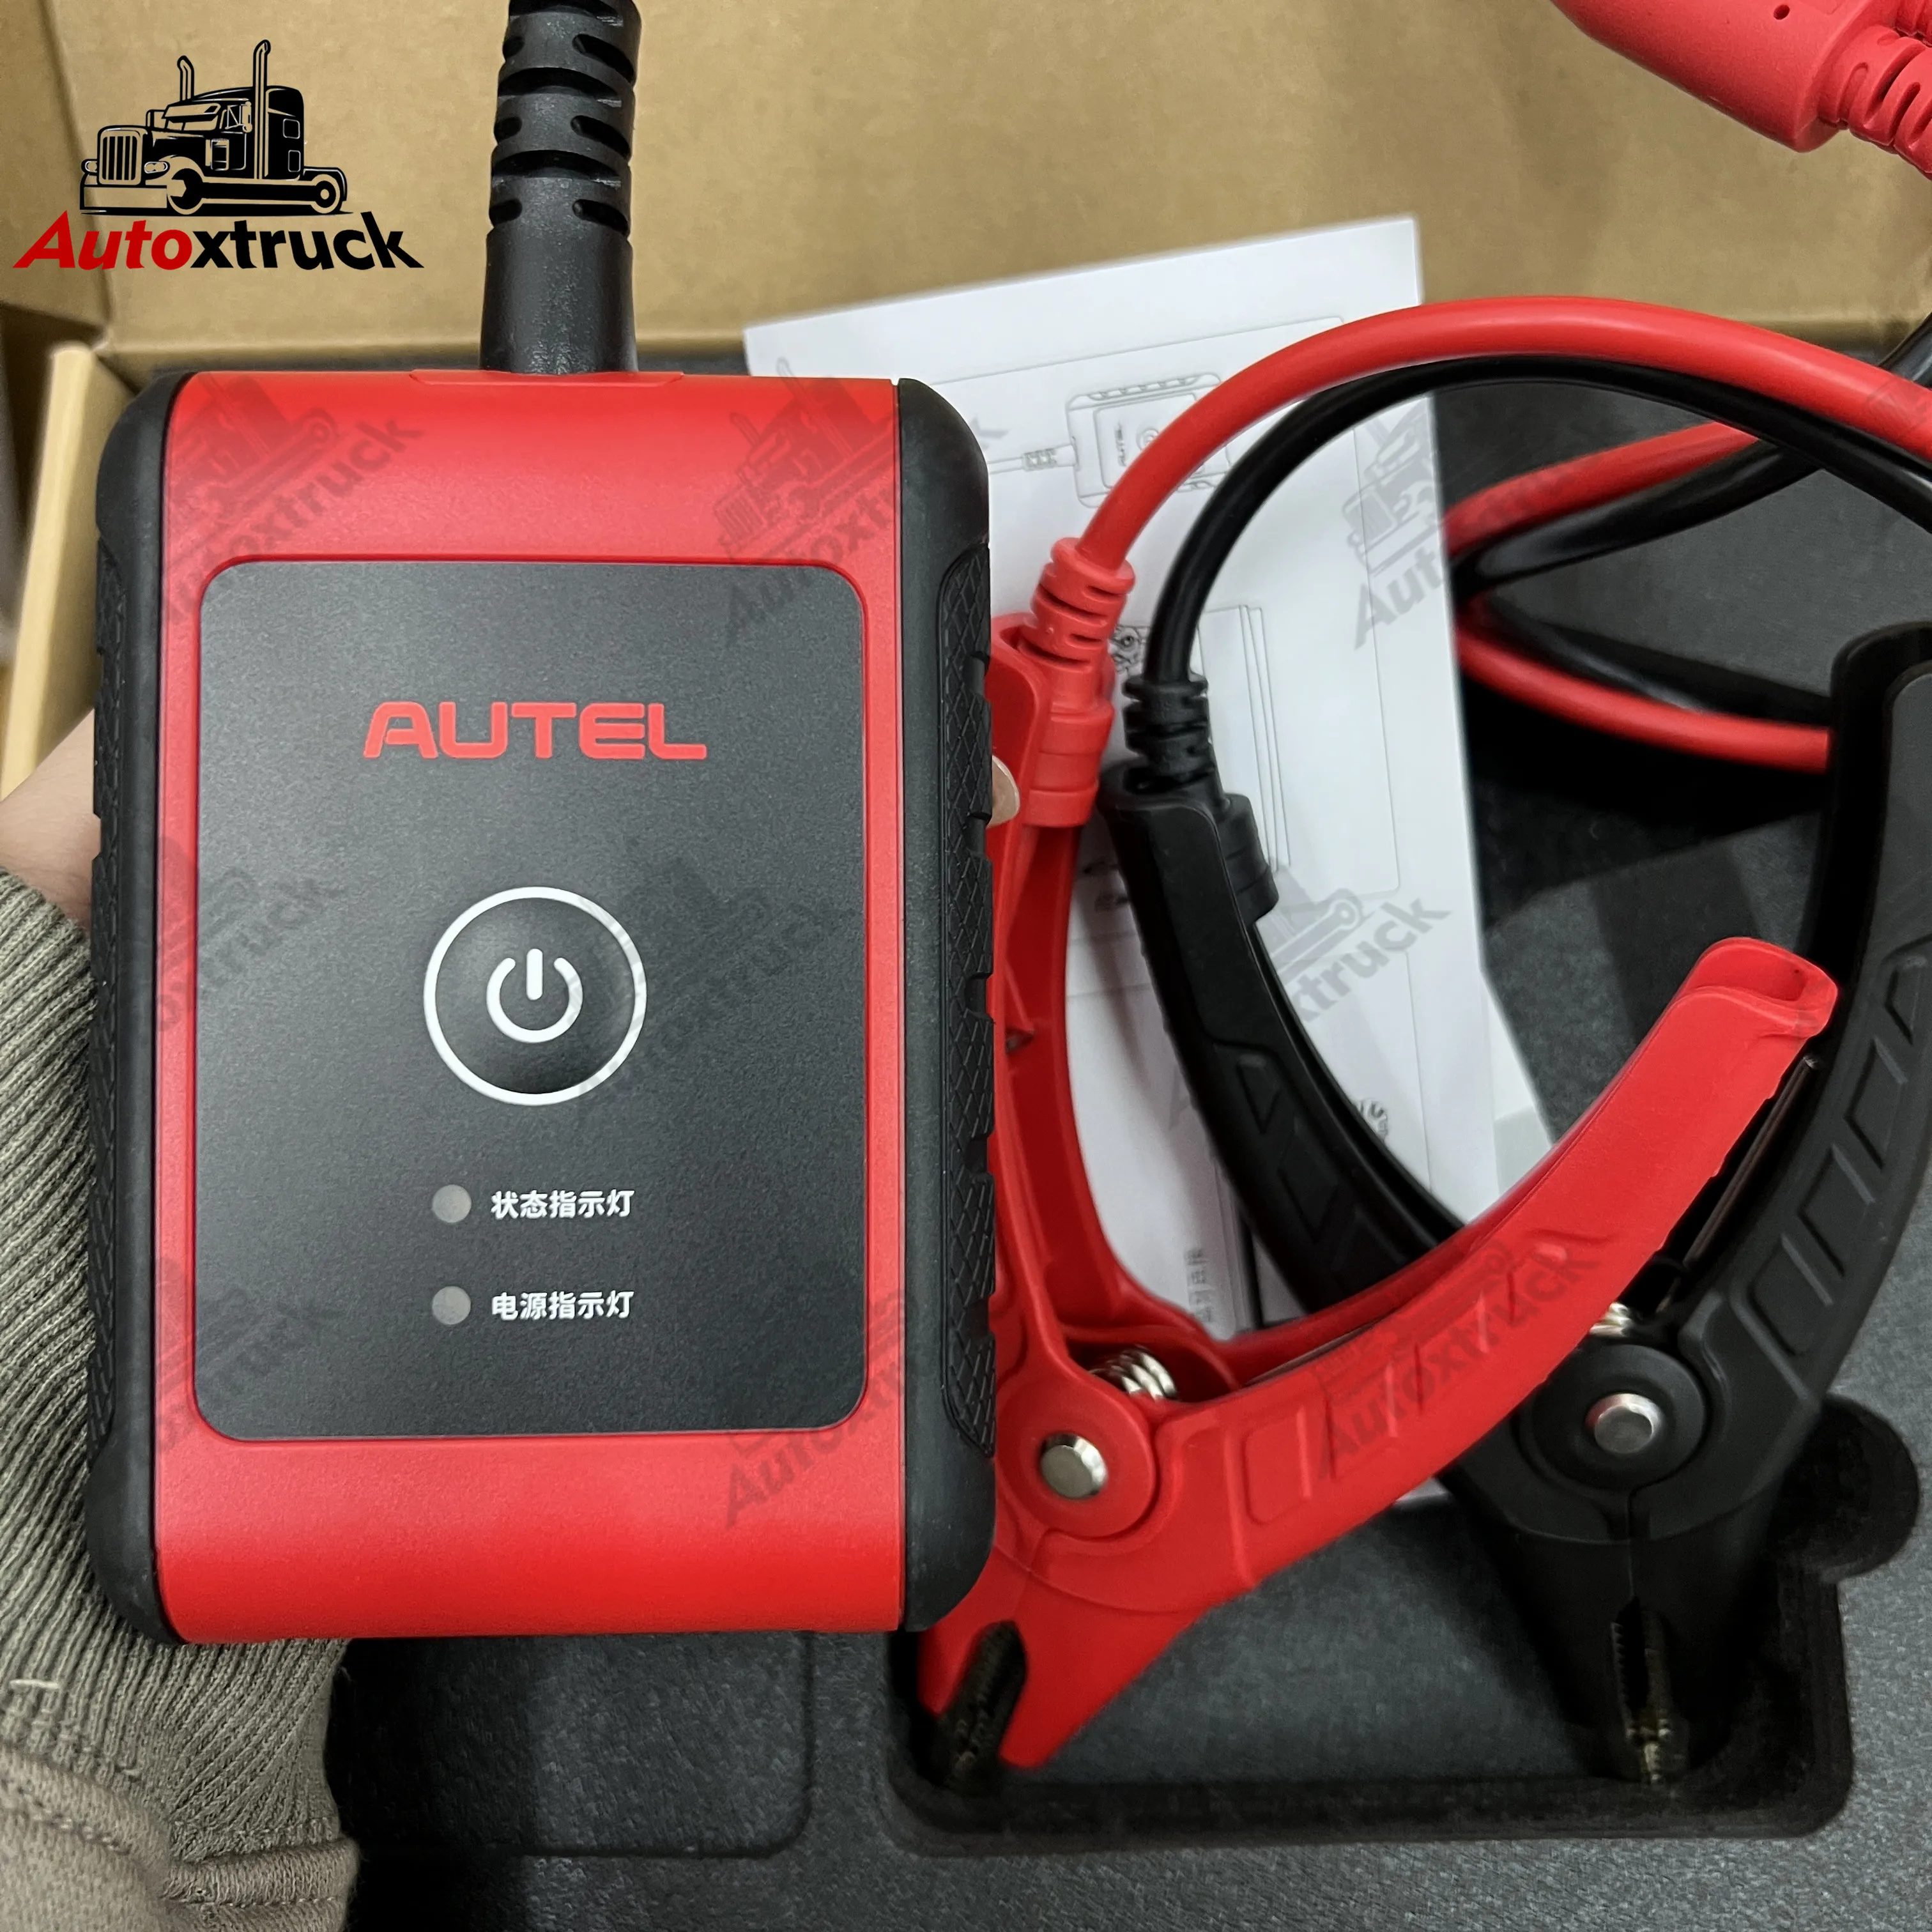 

Autel MaxiBAS BT506 Auto Battery Autel MaxiSys Tablet and Electrical System Analysis Tool Tester Works for iOS/ Android